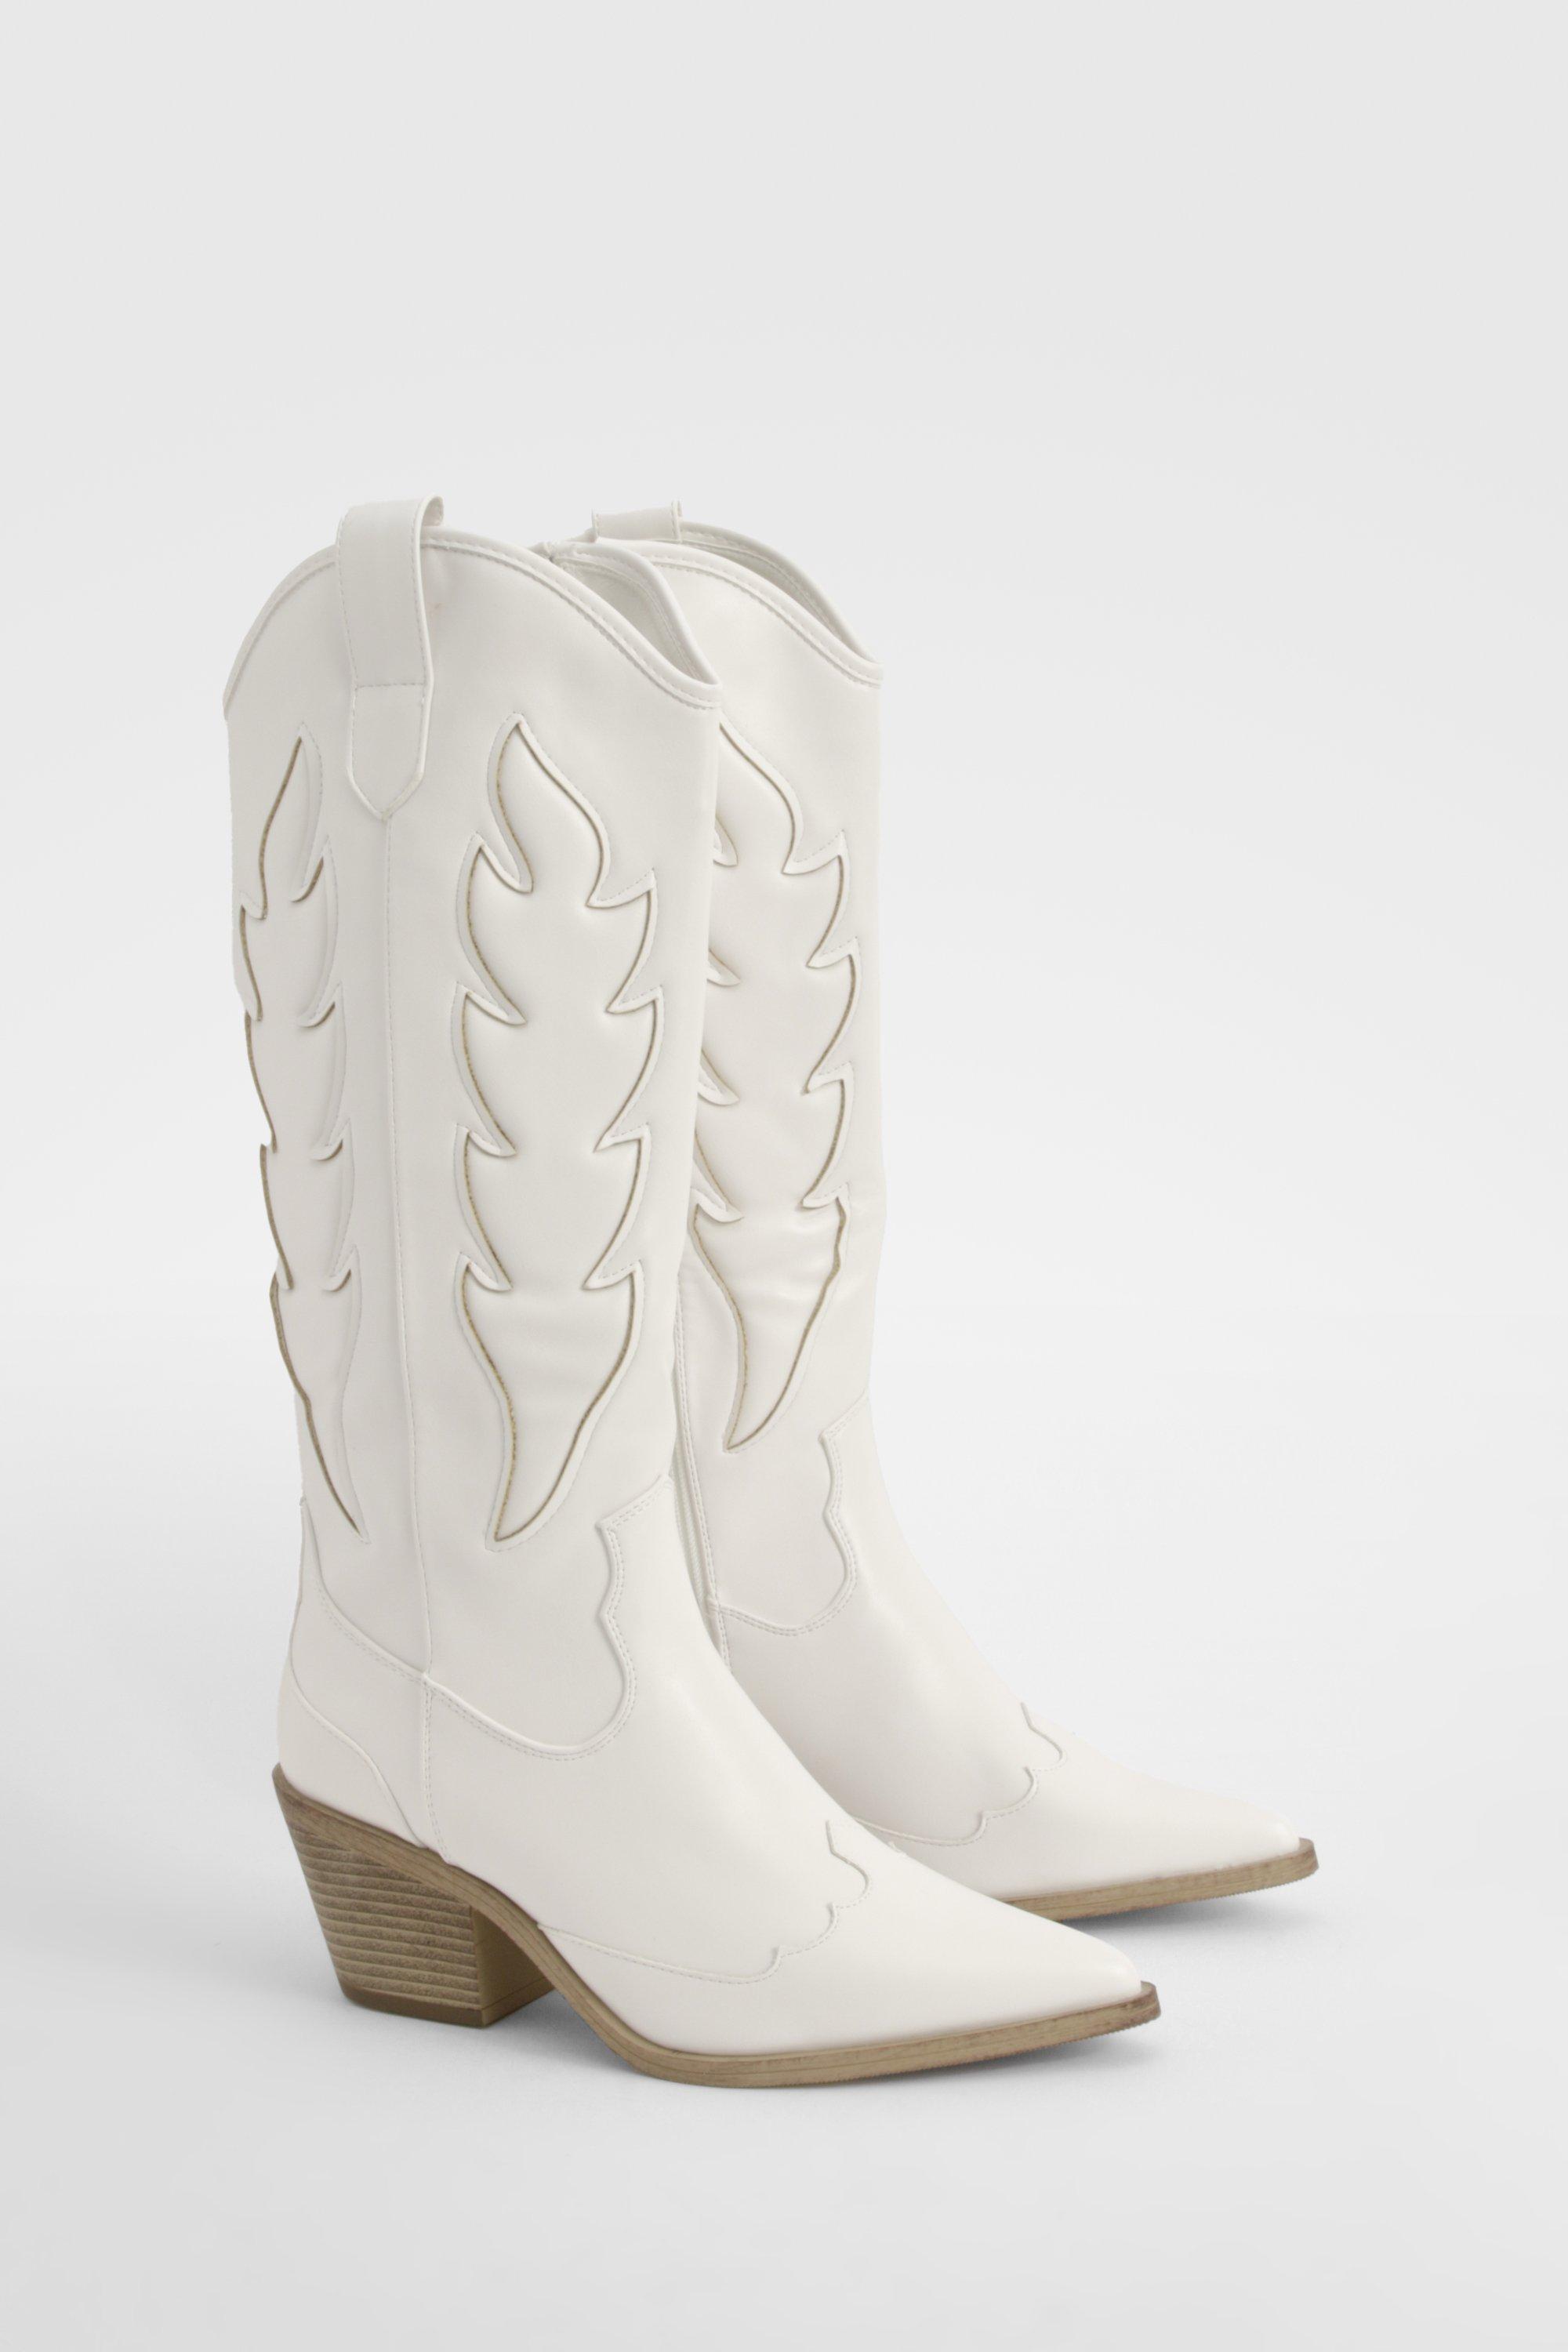 Boohoo Embroidered Detail Western Cowboy Boots, White